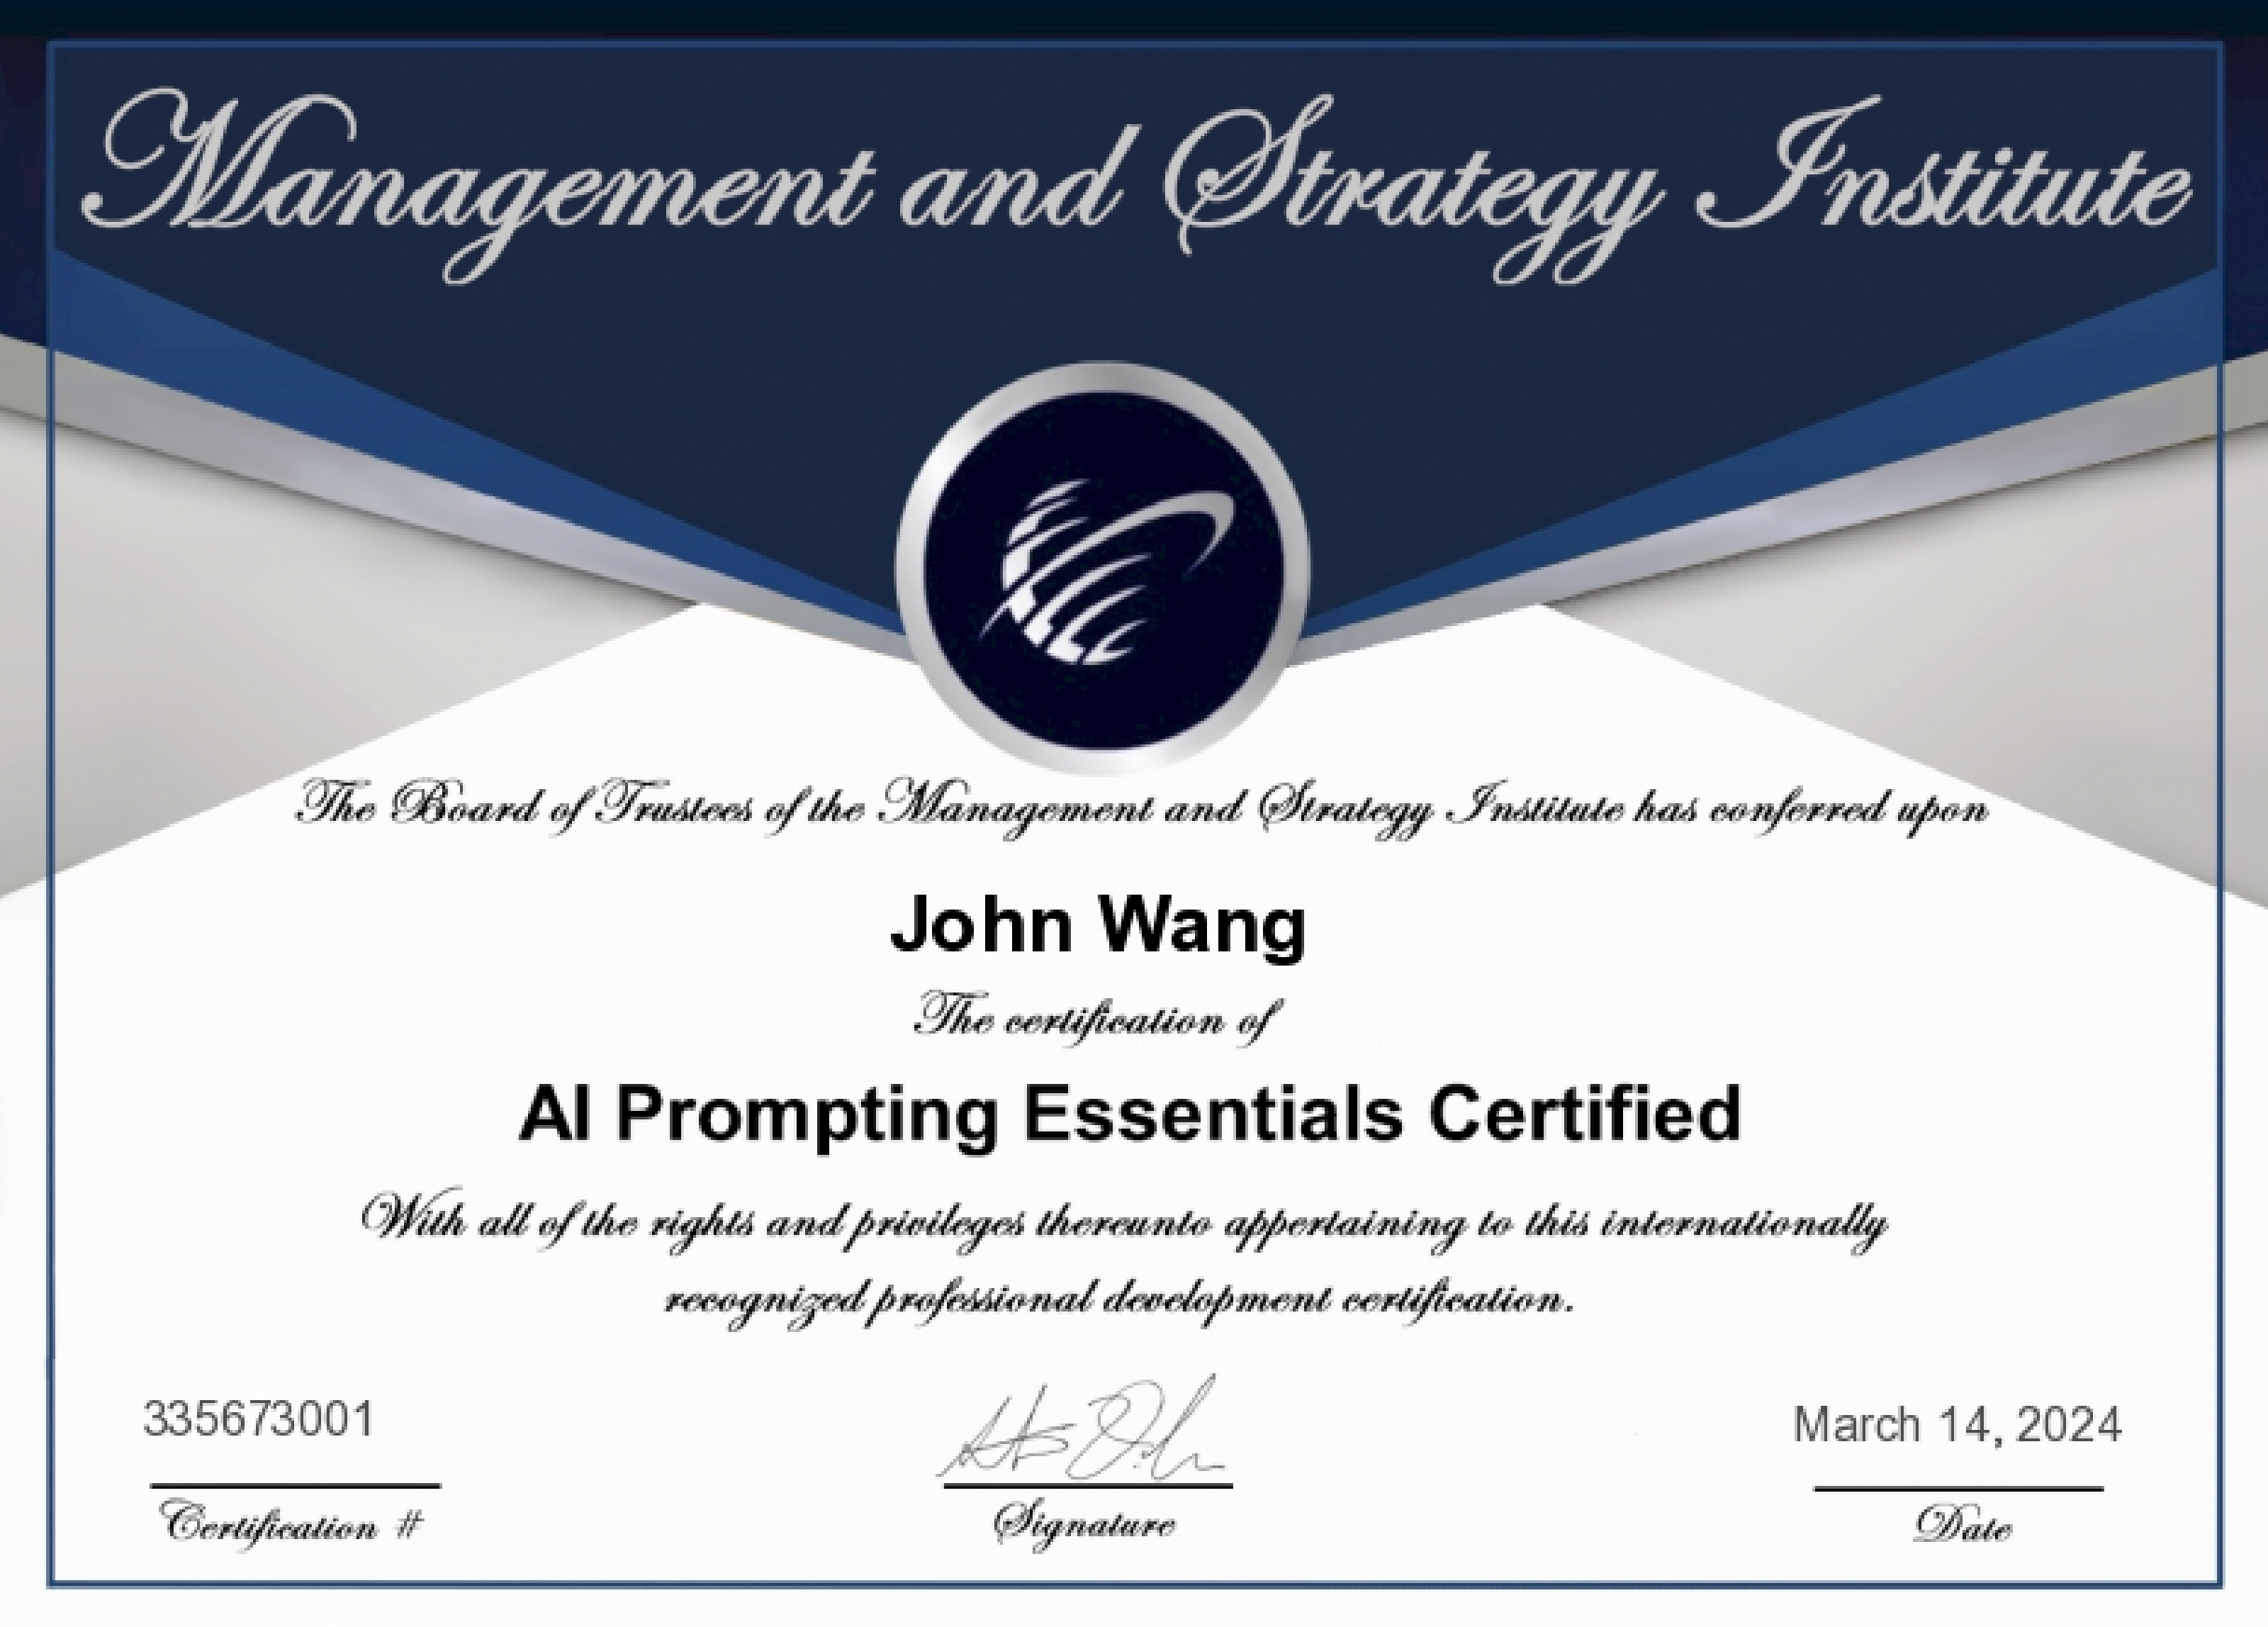 John's AI Prompting Essentials Certified (AIPEC) from Management and Strategy Institute